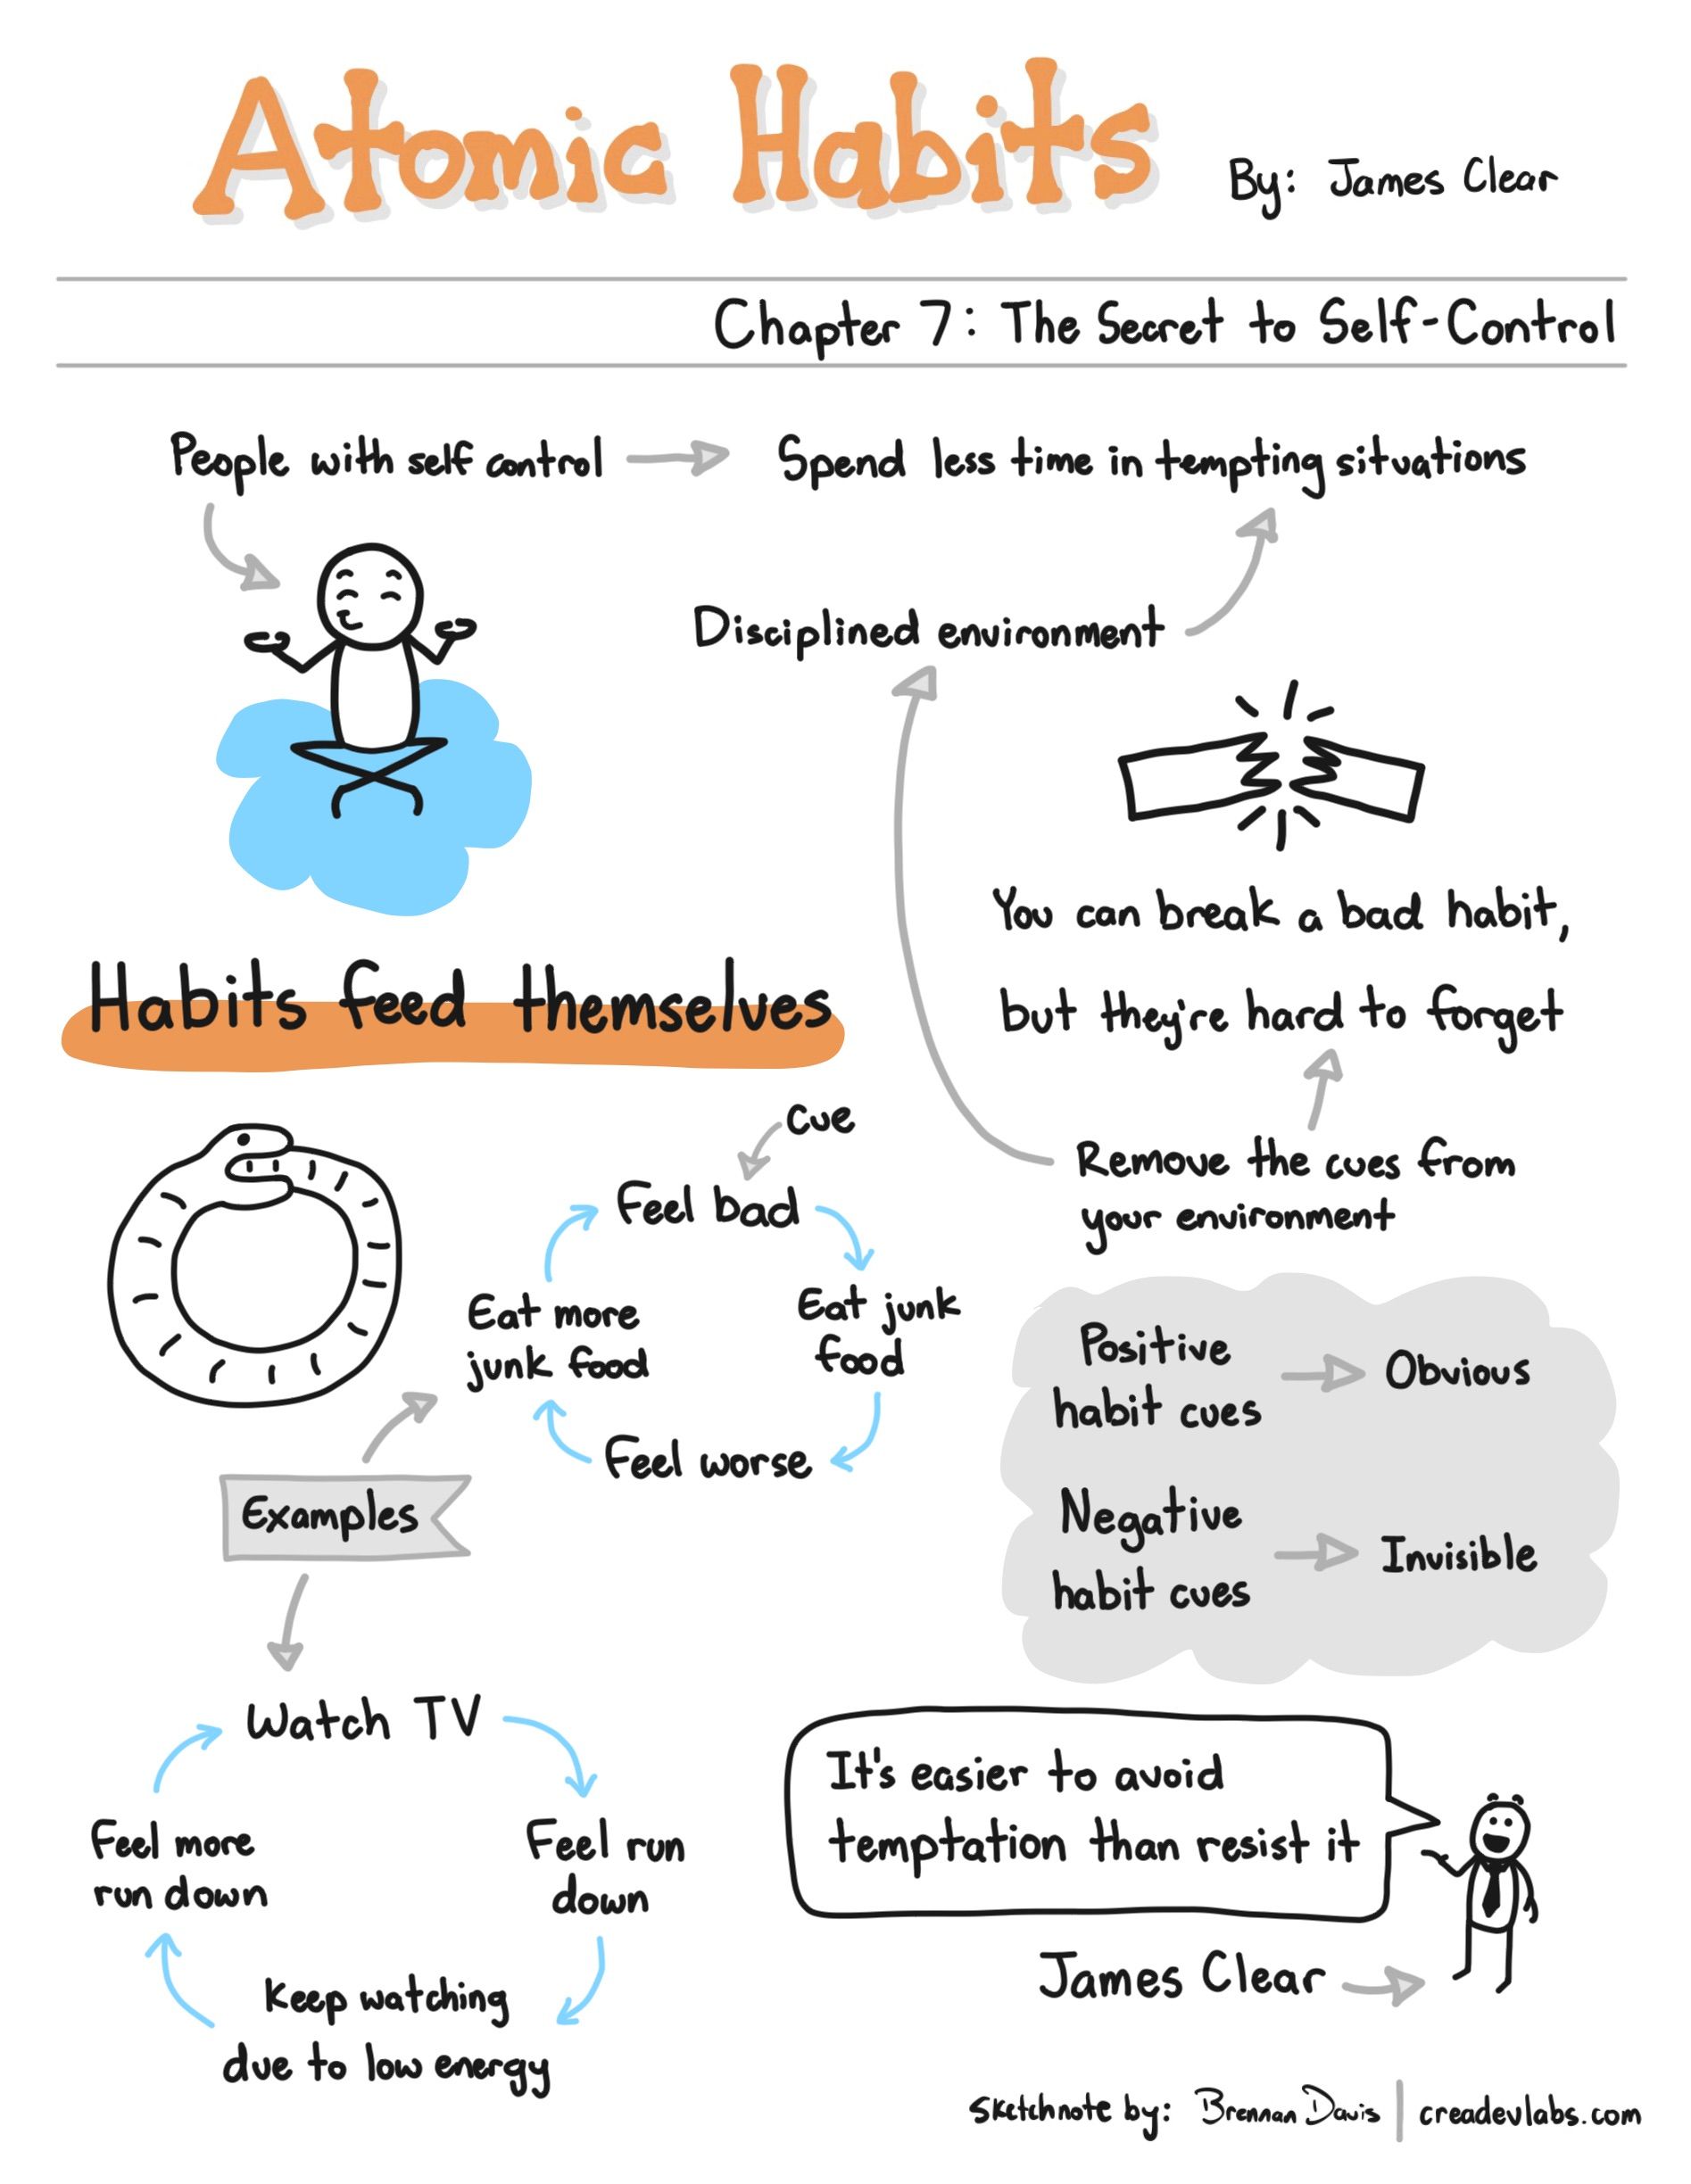 Summary of Atomic Habits: The Secret to Self-Control